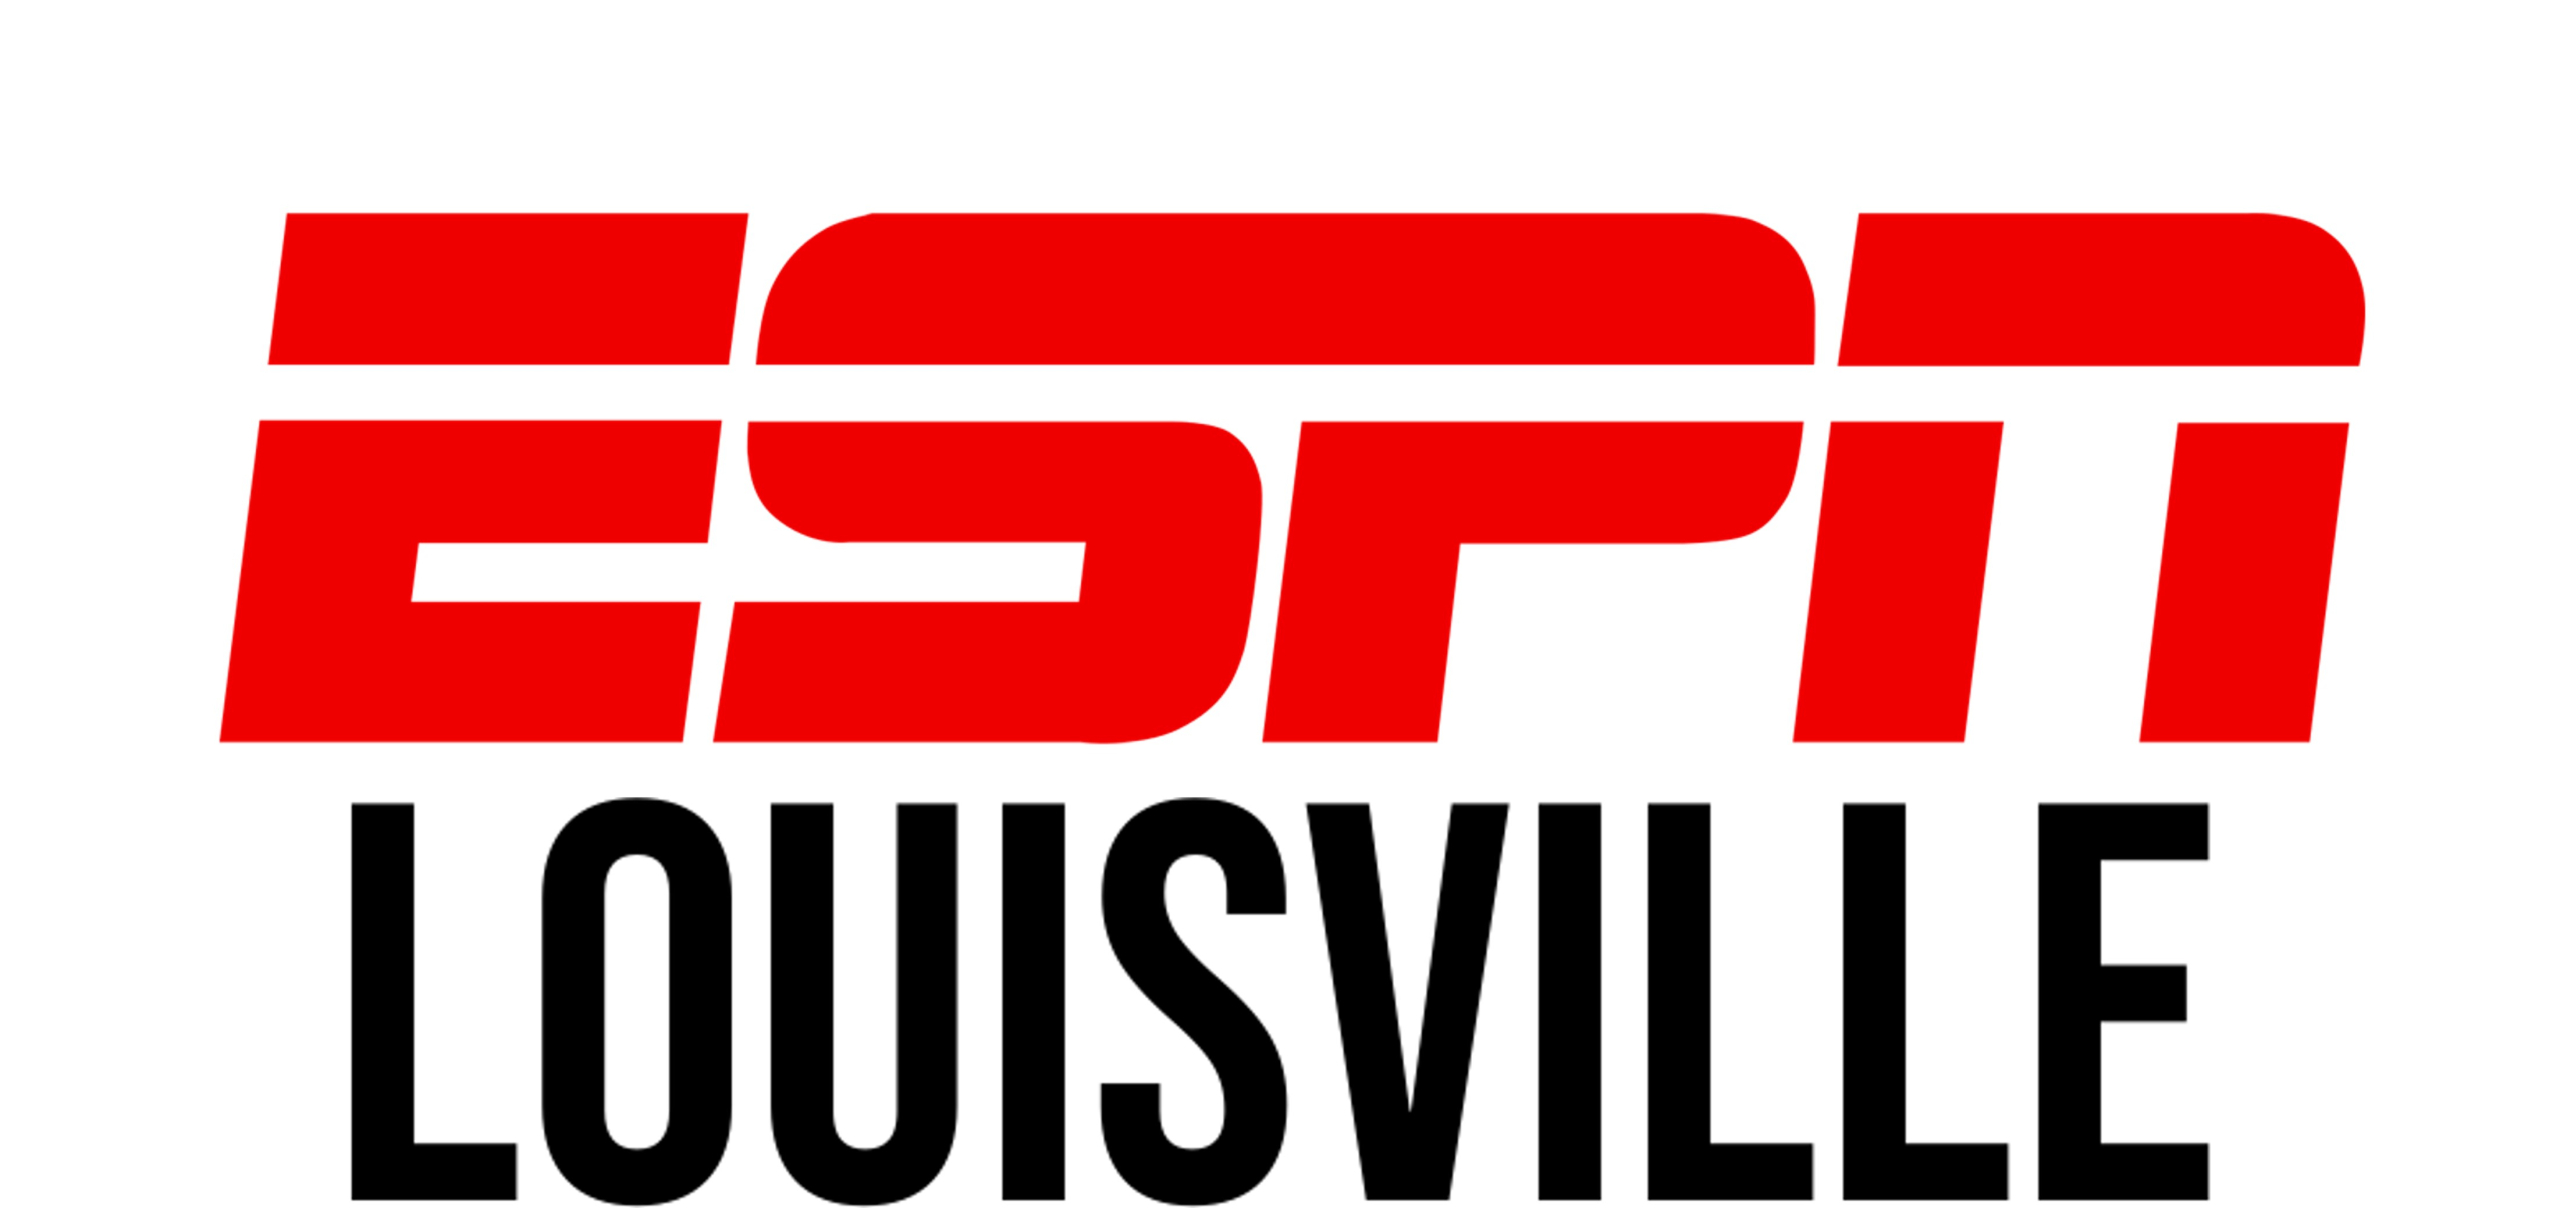 ESPN LOUISVILLE ADDS SELVAGGI AS GENERAL MANAGER